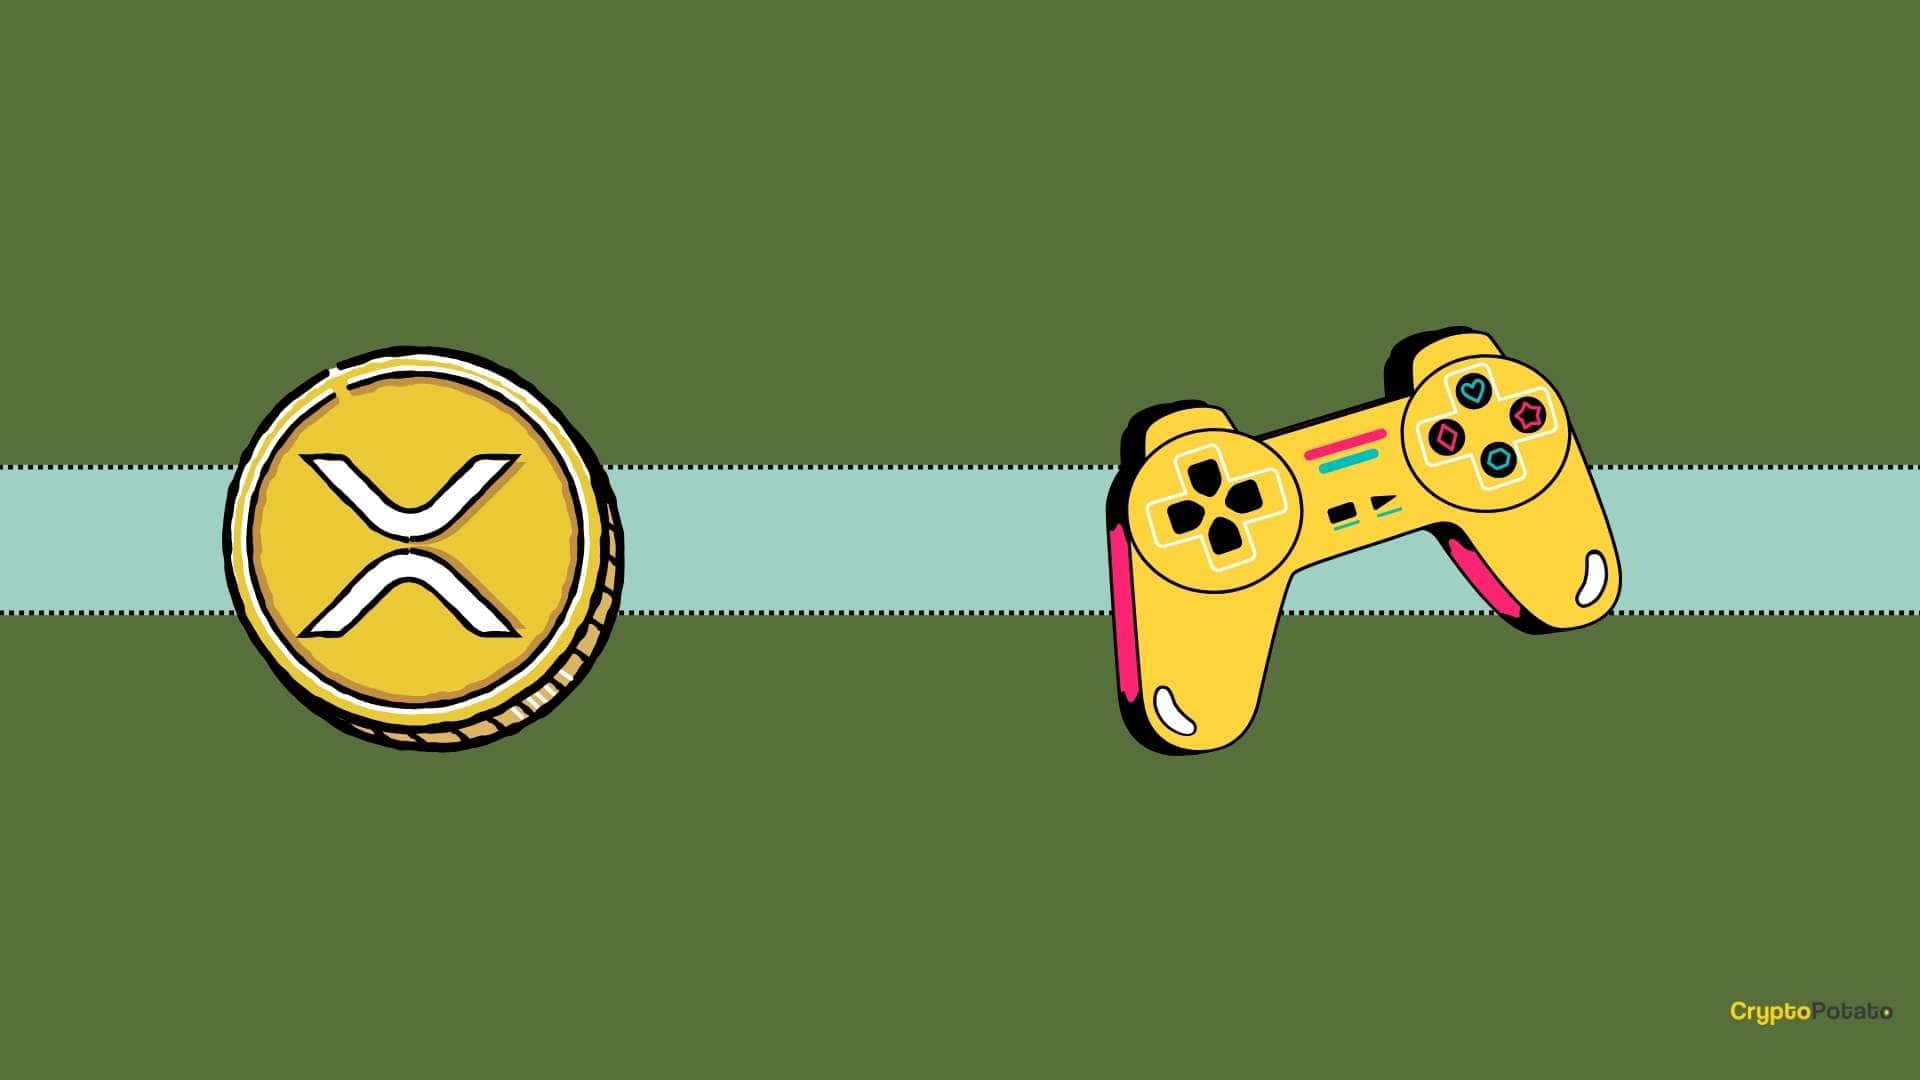 This Gaming Giant Now Accept's Ripple (XRP) as a Payment Method